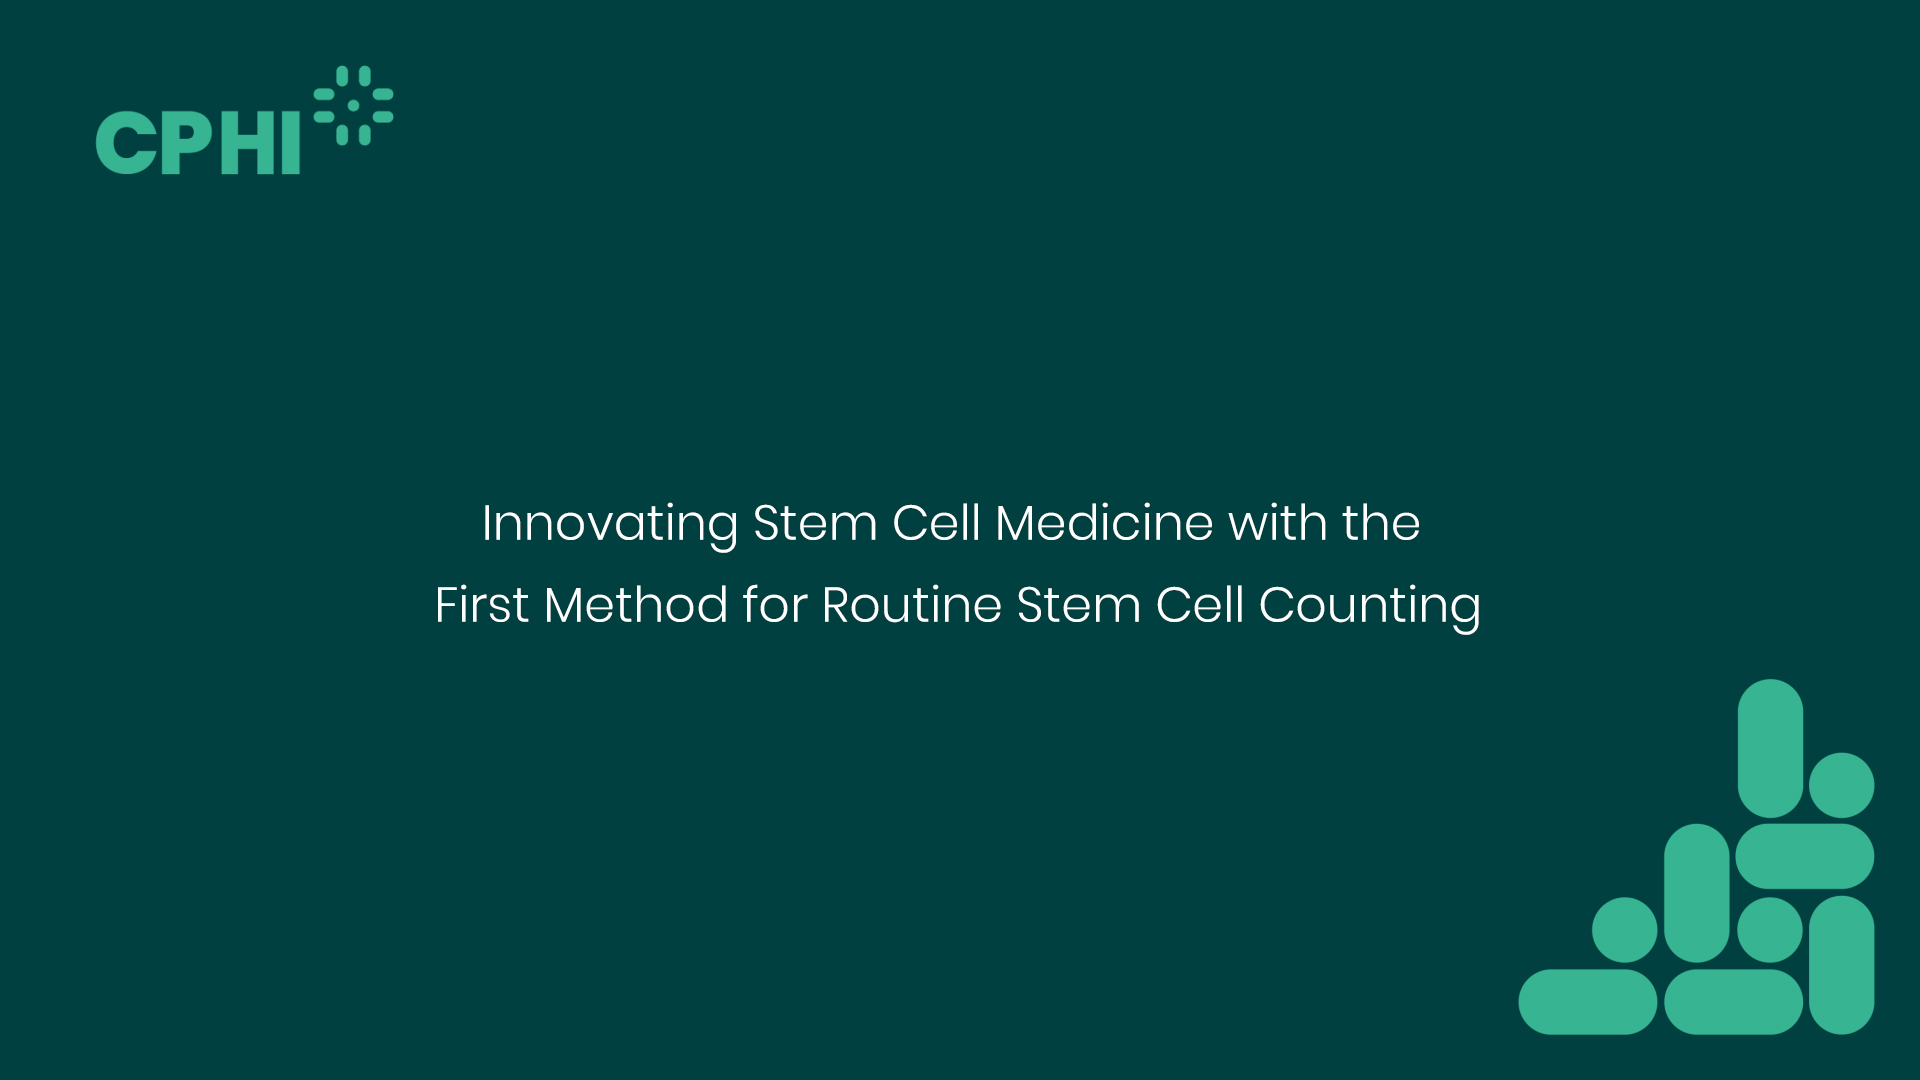 Innovating Stem Cell Medicine with the First Method for Routine Stem Cell Counting